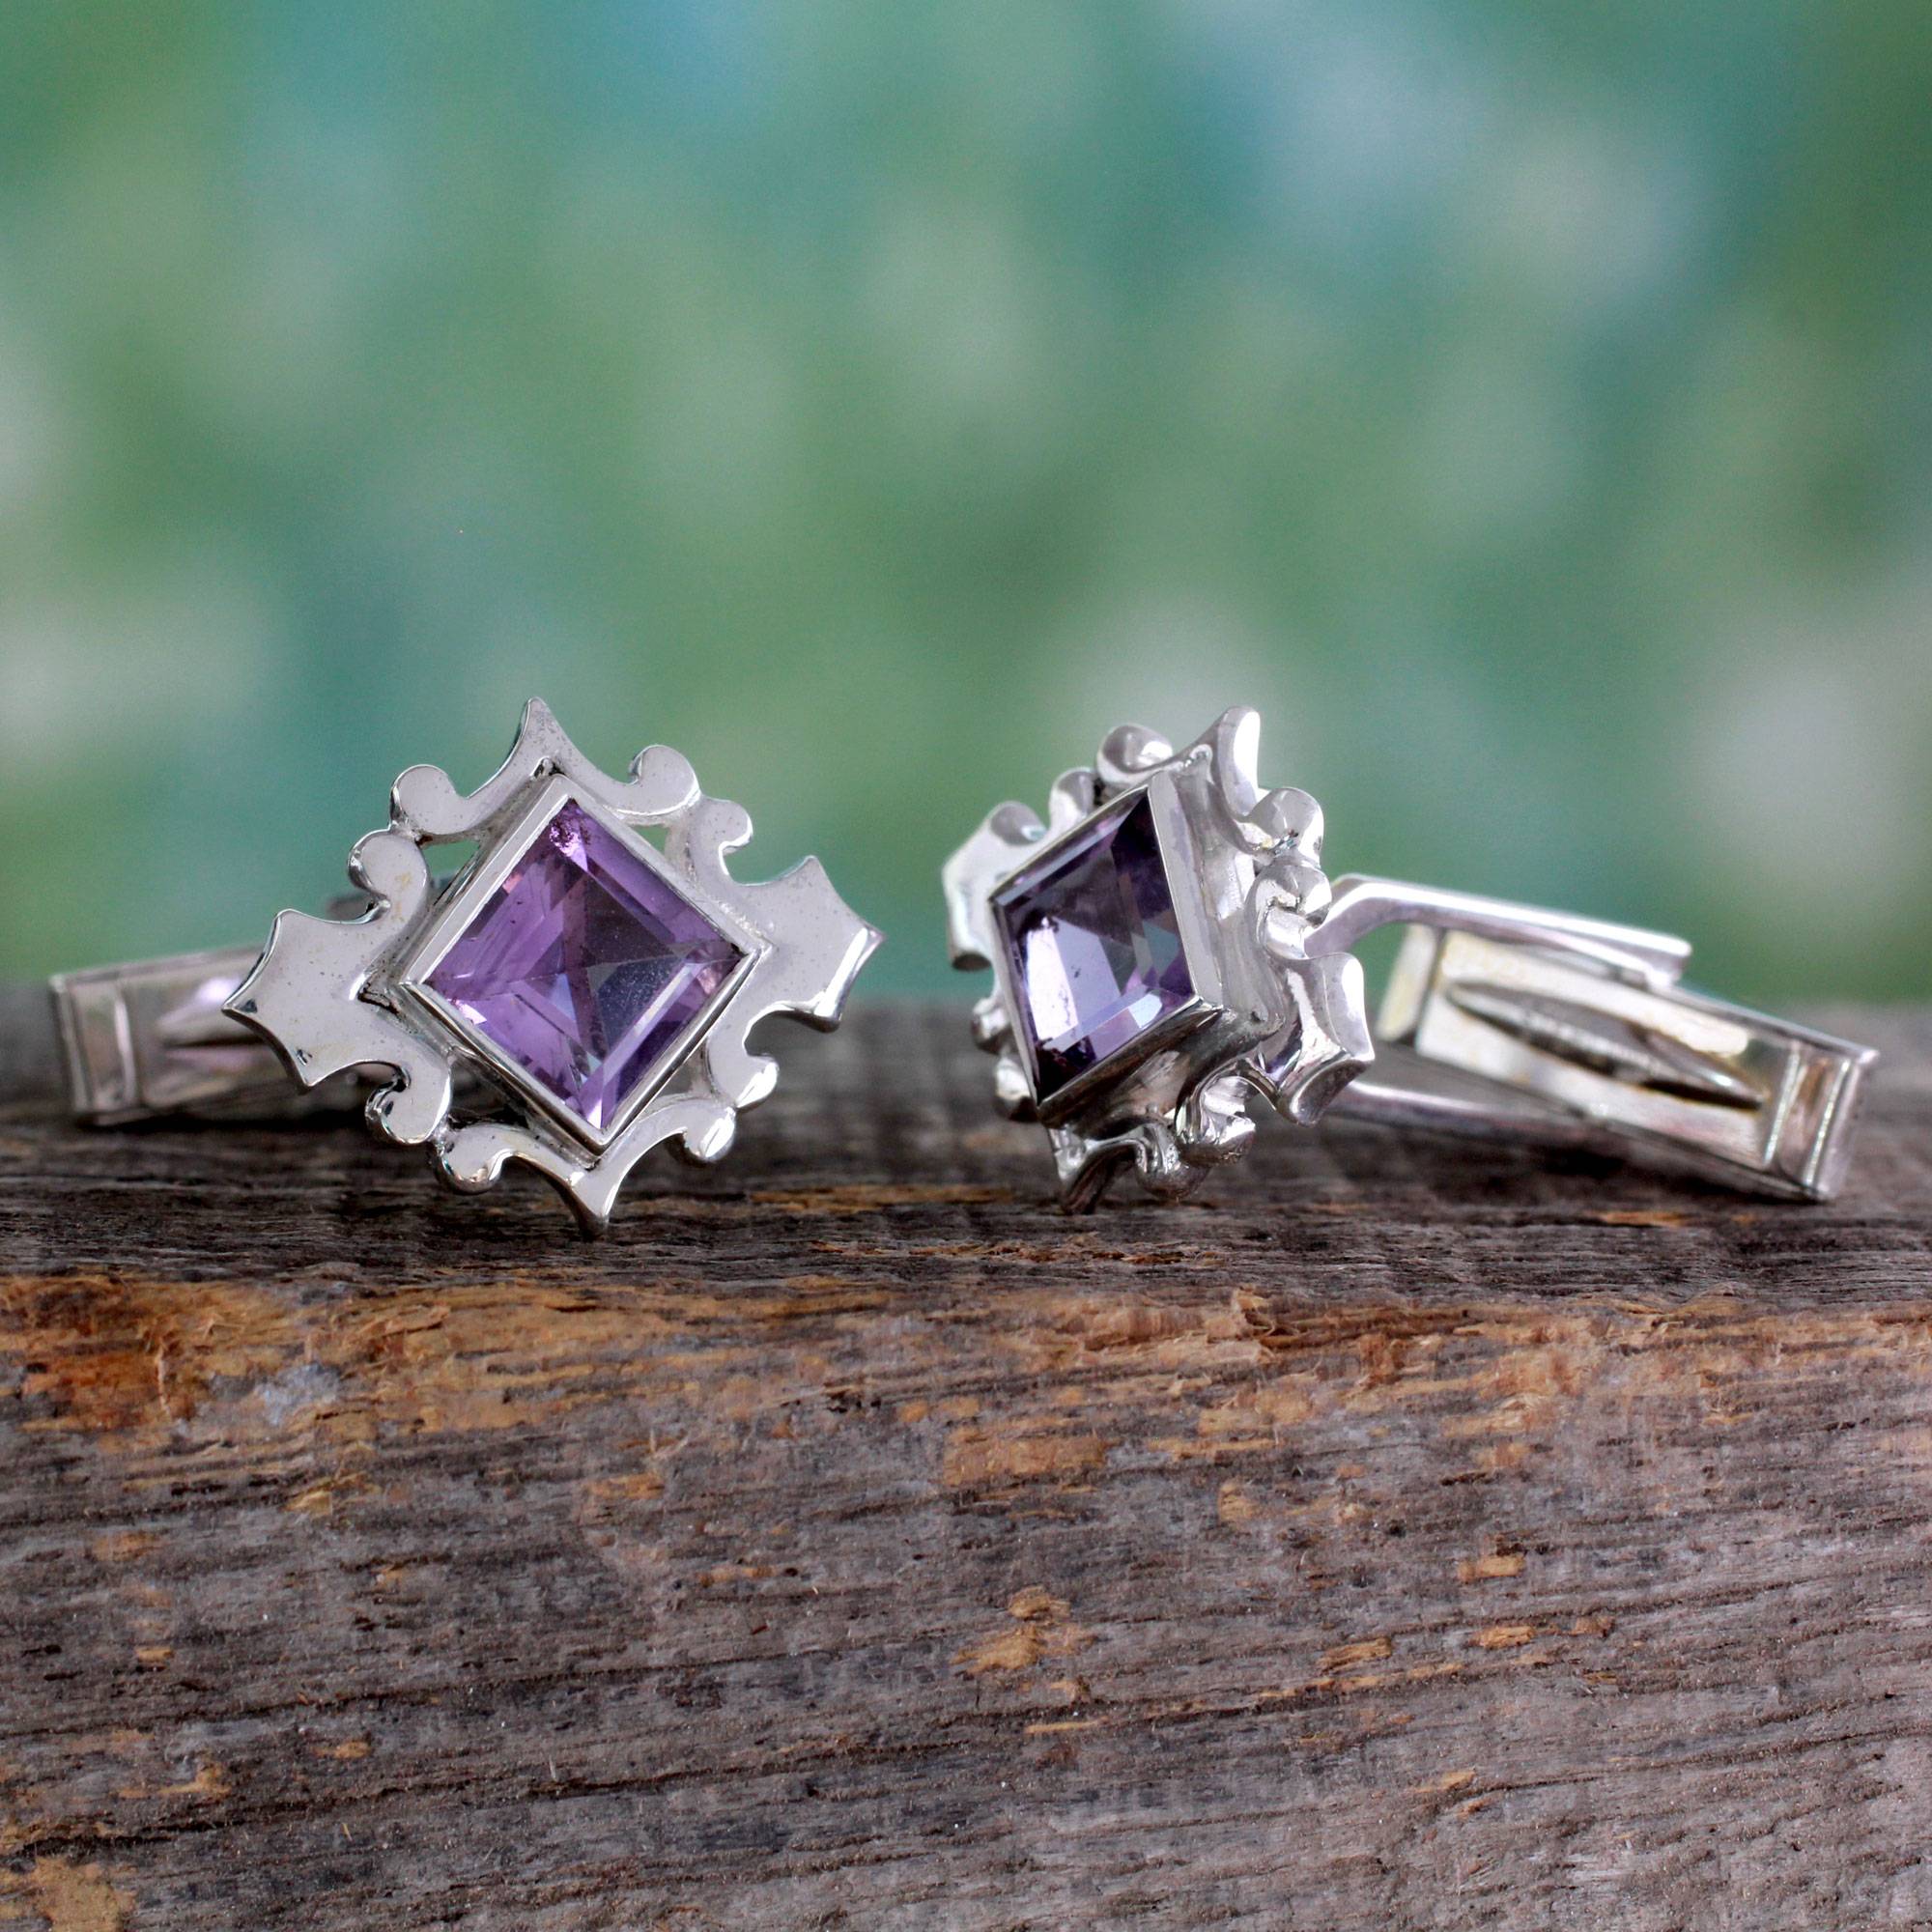 Square Cut Amethyst and Sterling Silver Cufflinks from India, 'Violet Squared'